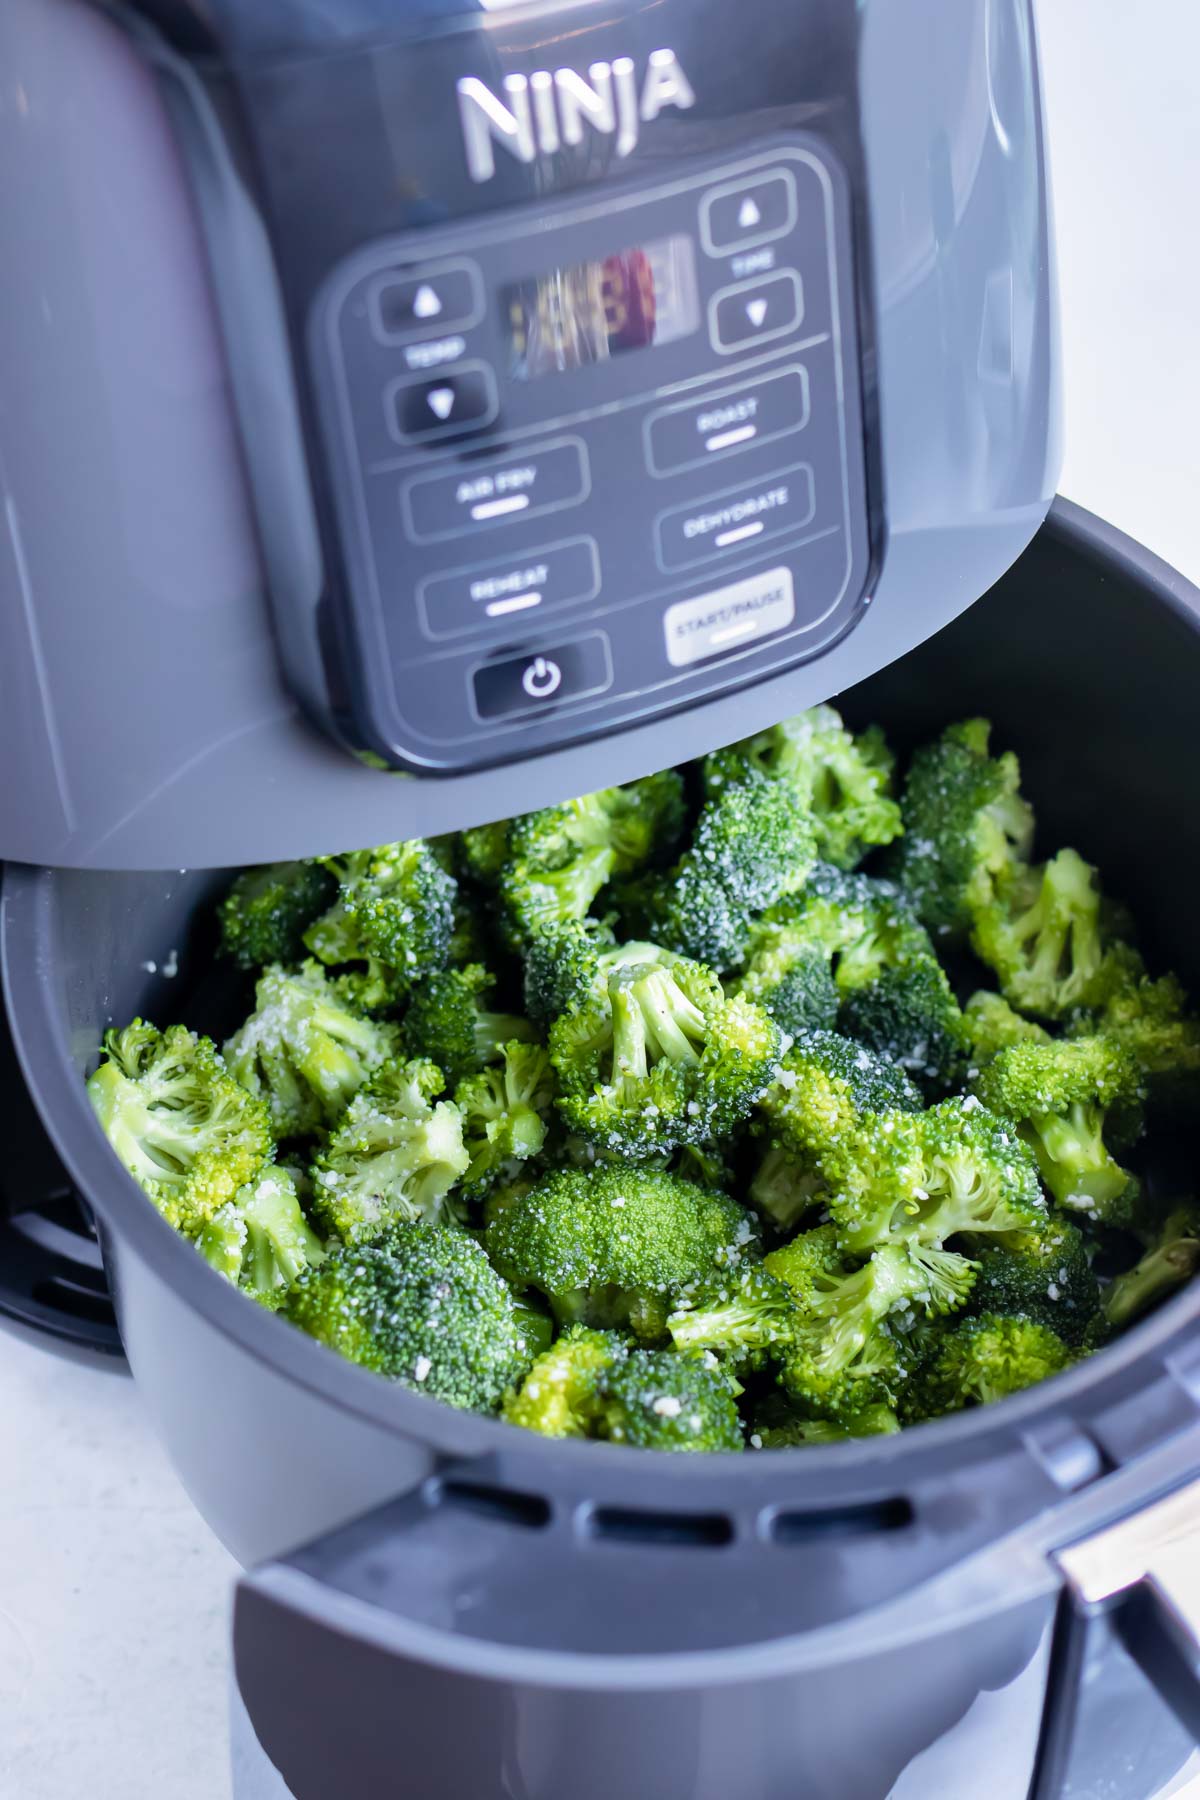 Broccoli is put inside the Ninja air fryer to be roasted.